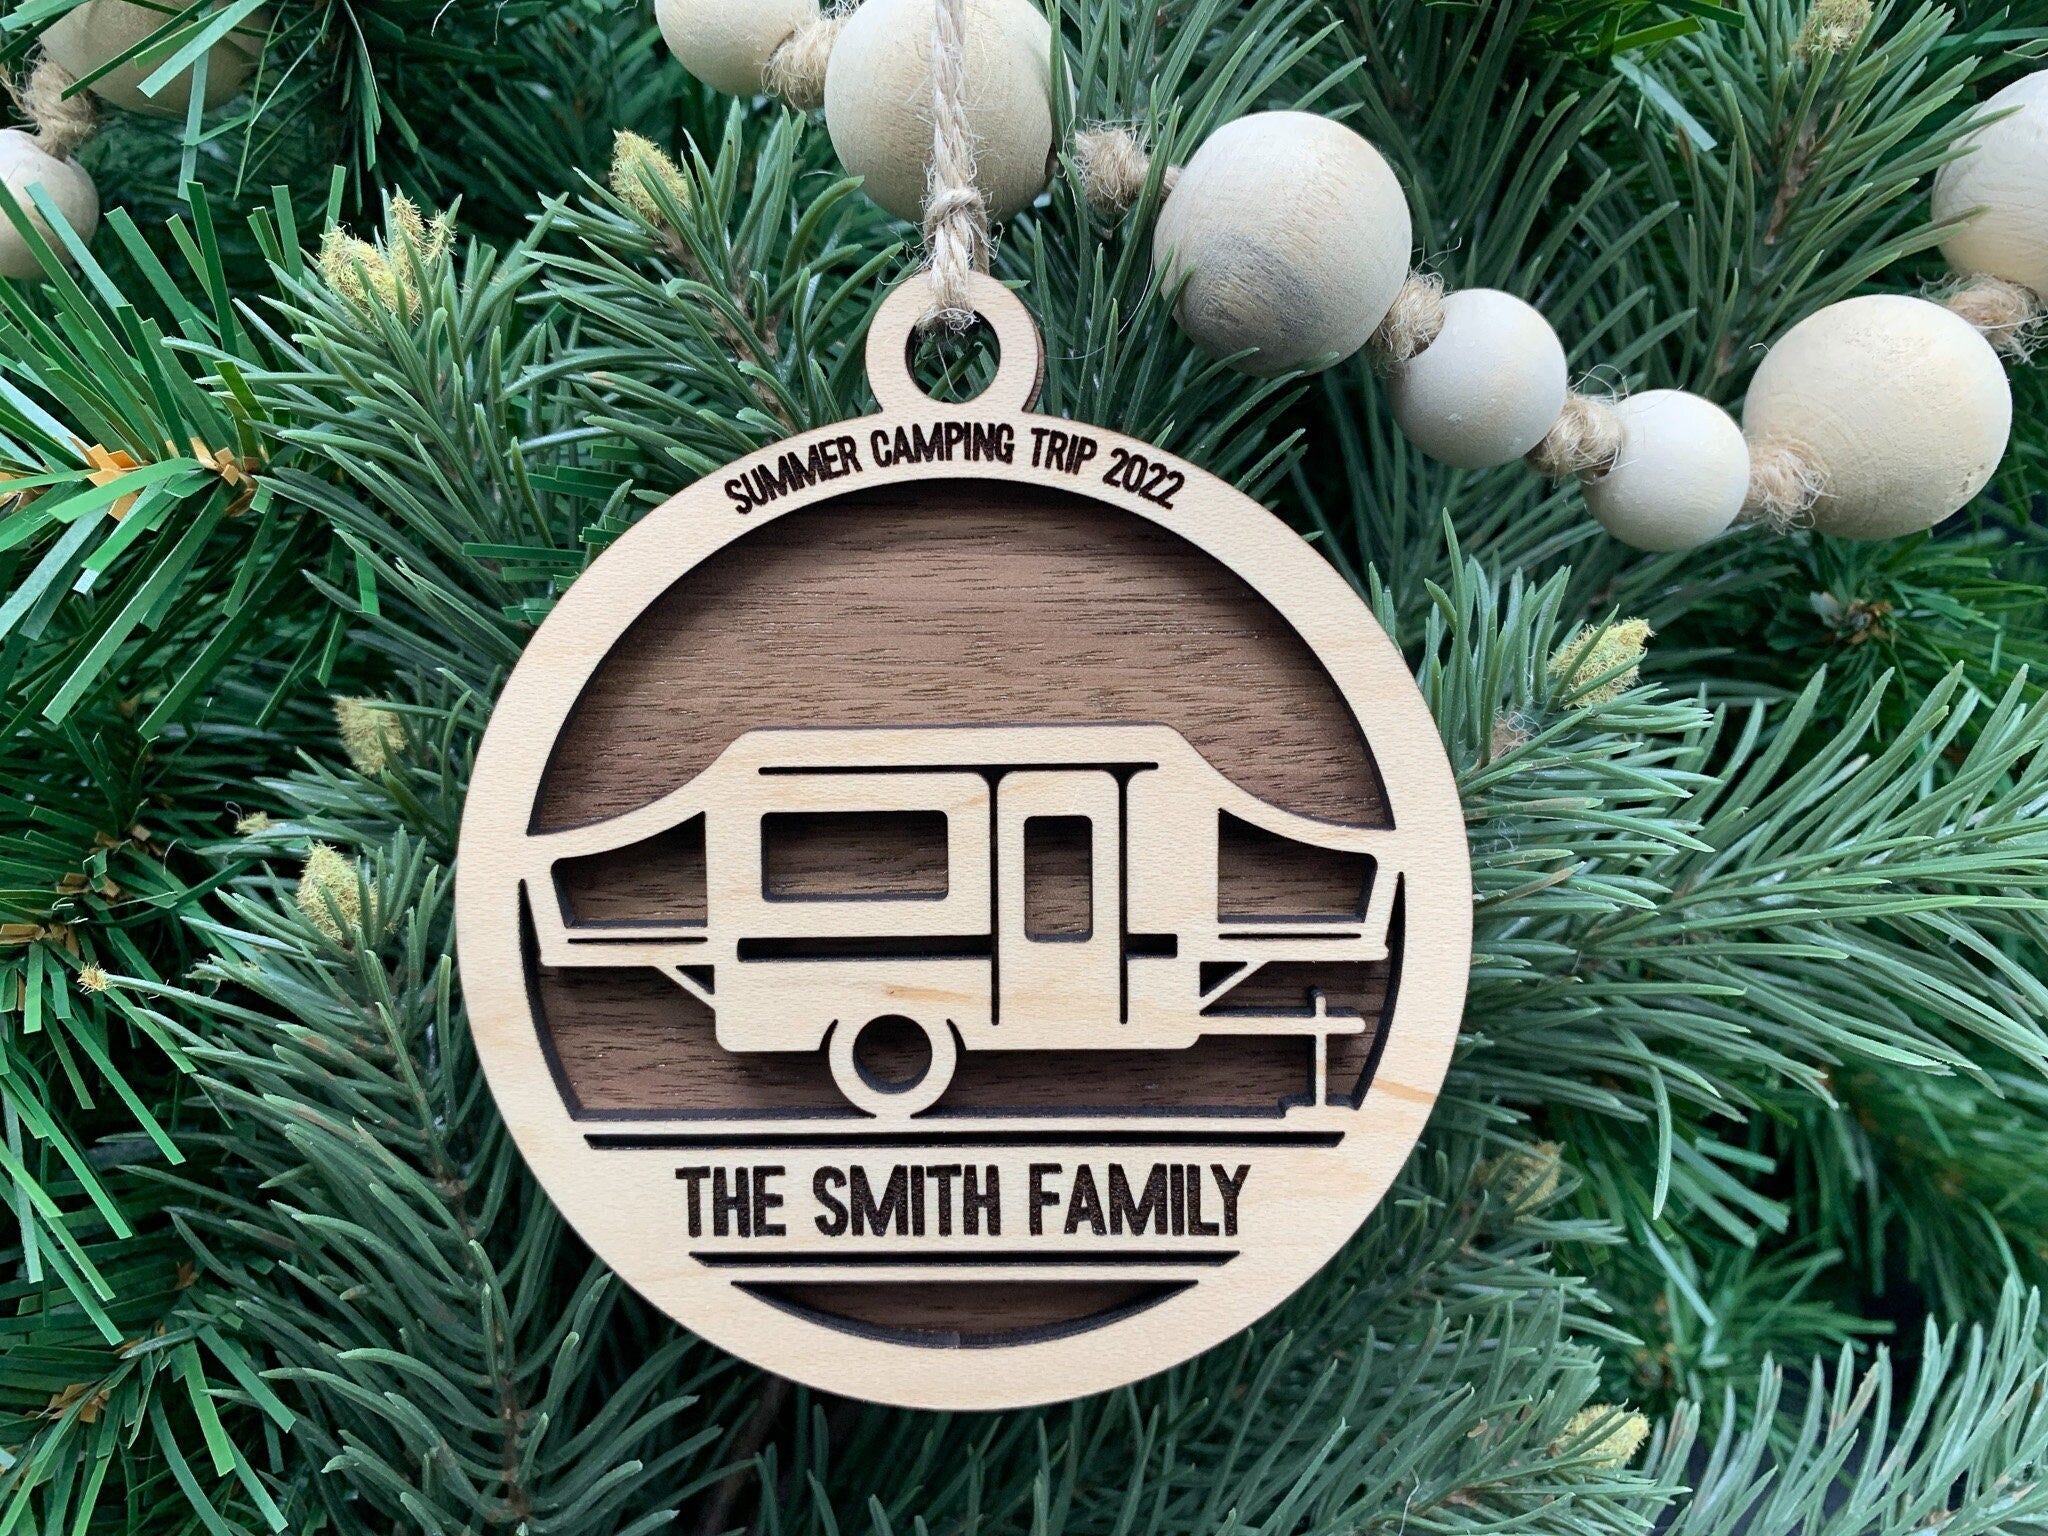 Personalized Wooden Pop-Up Camper Ornament, Camping Trip Ornament, Vacation Ornament